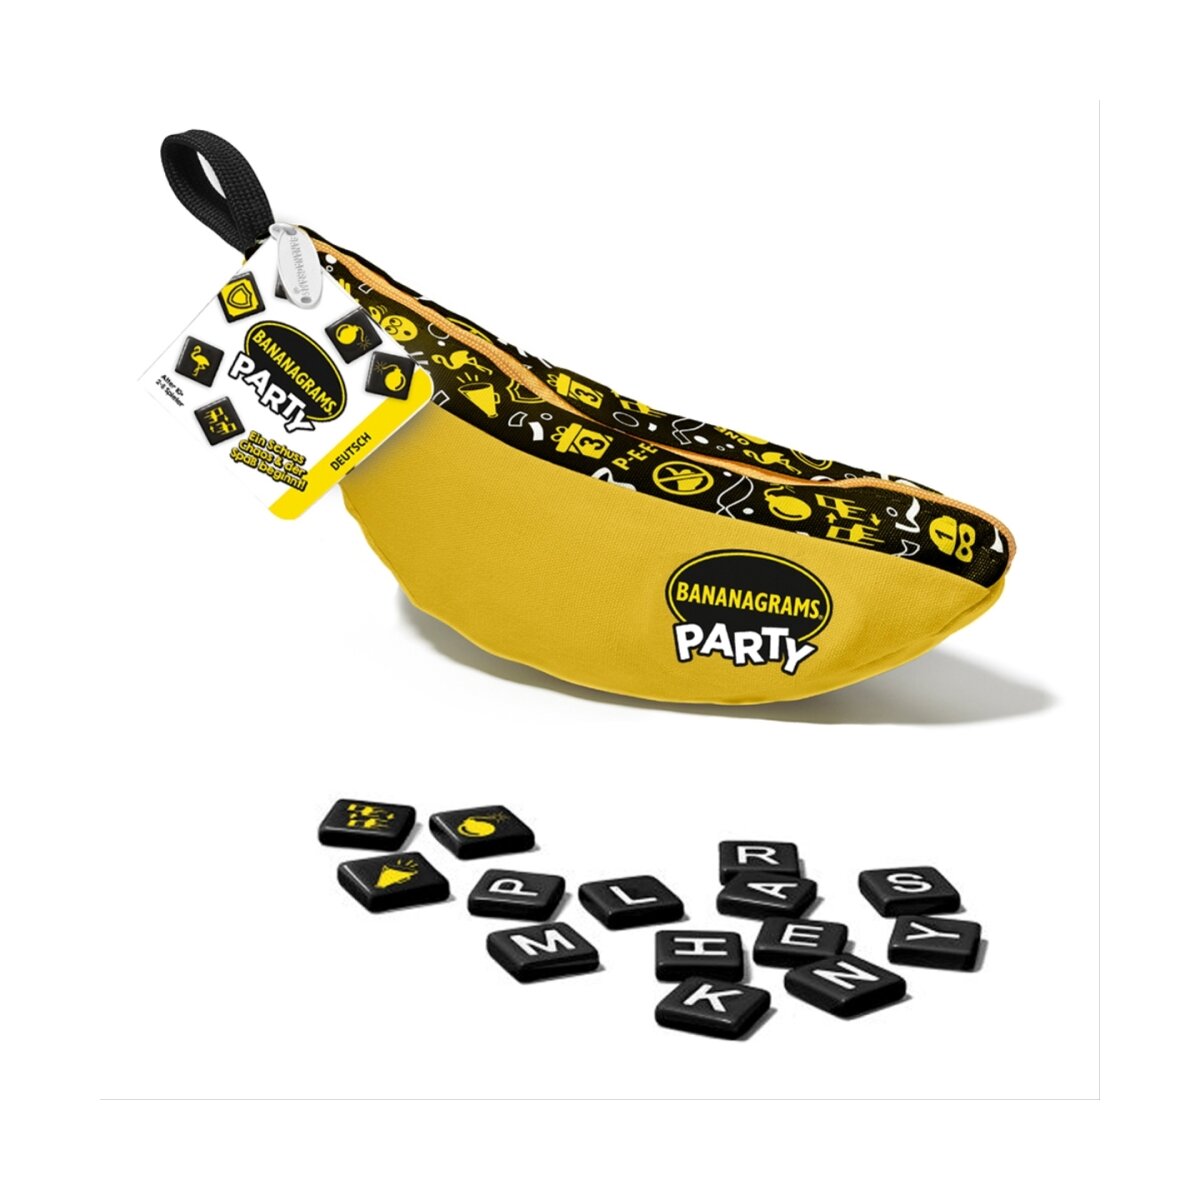 GAMEFACTORY - Bananagrams PARTY (d)